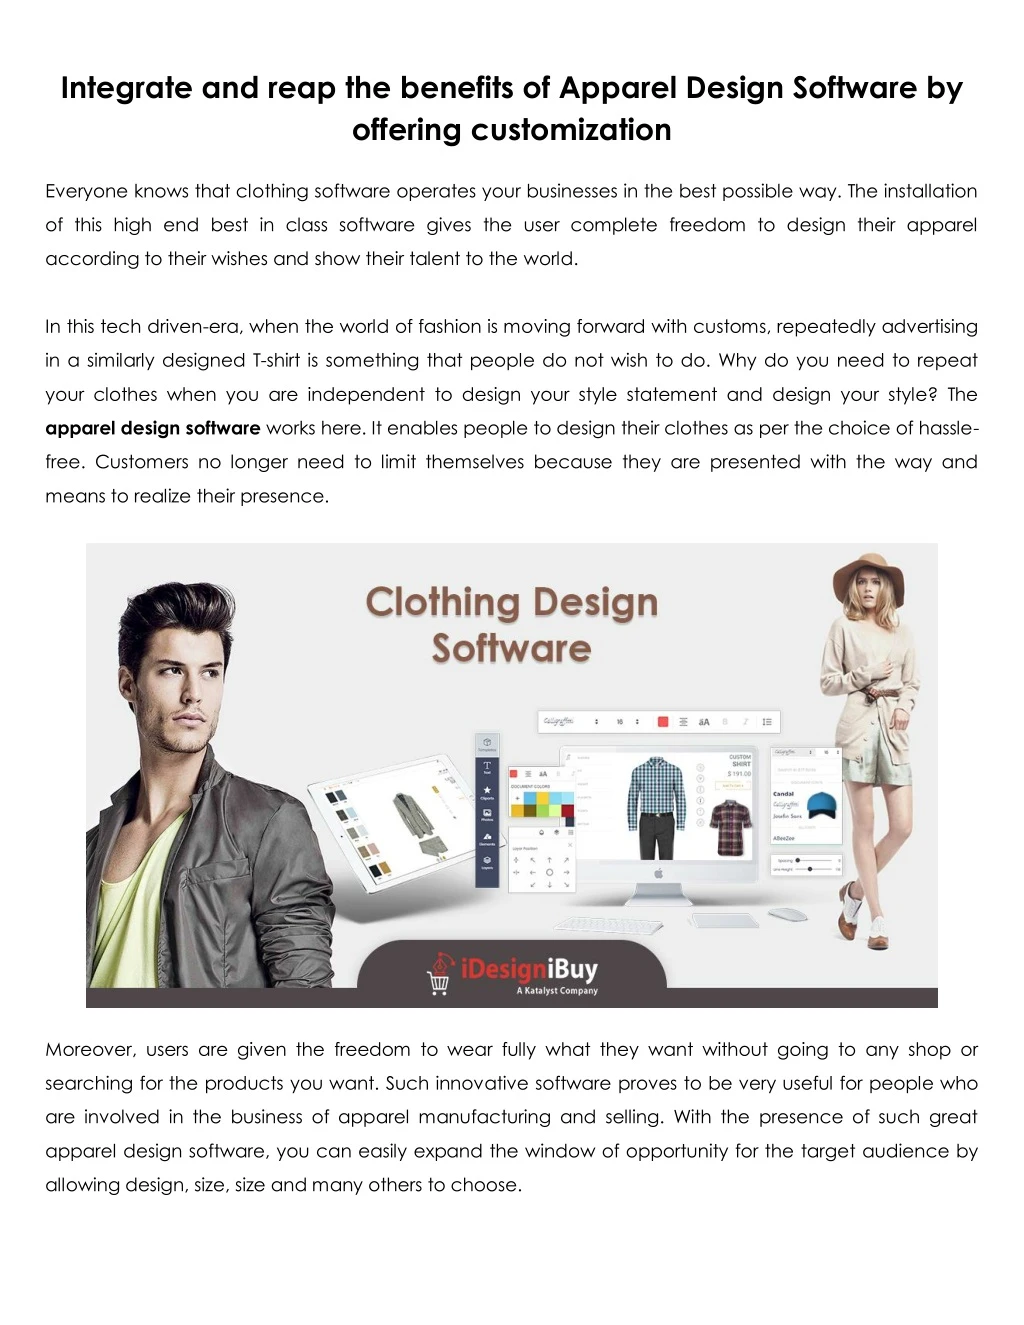 integrate and reap the benefits of apparel design